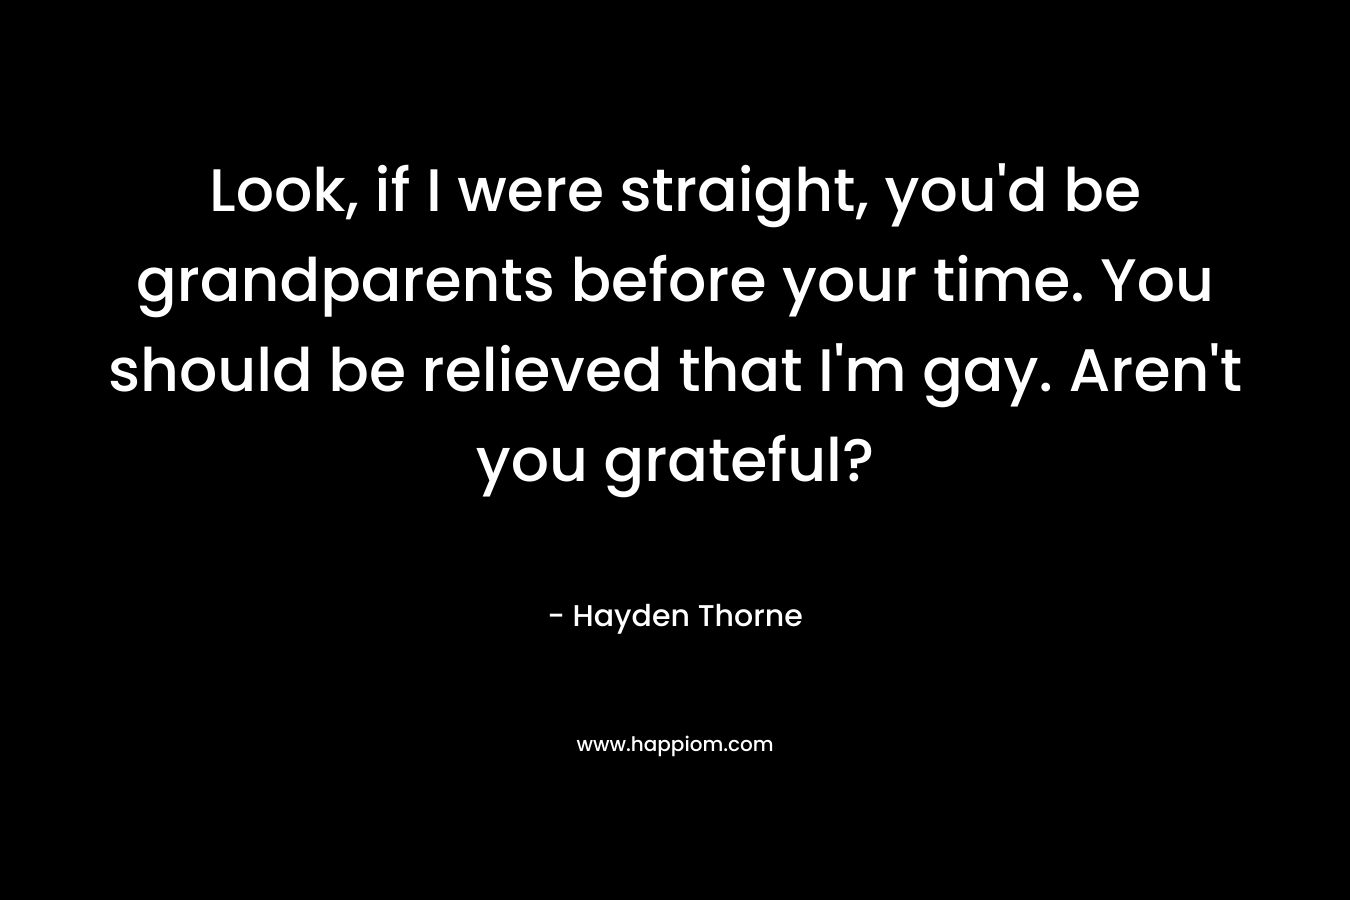 Look, if I were straight, you’d be grandparents before your time. You should be relieved that I’m gay. Aren’t you grateful? – Hayden Thorne